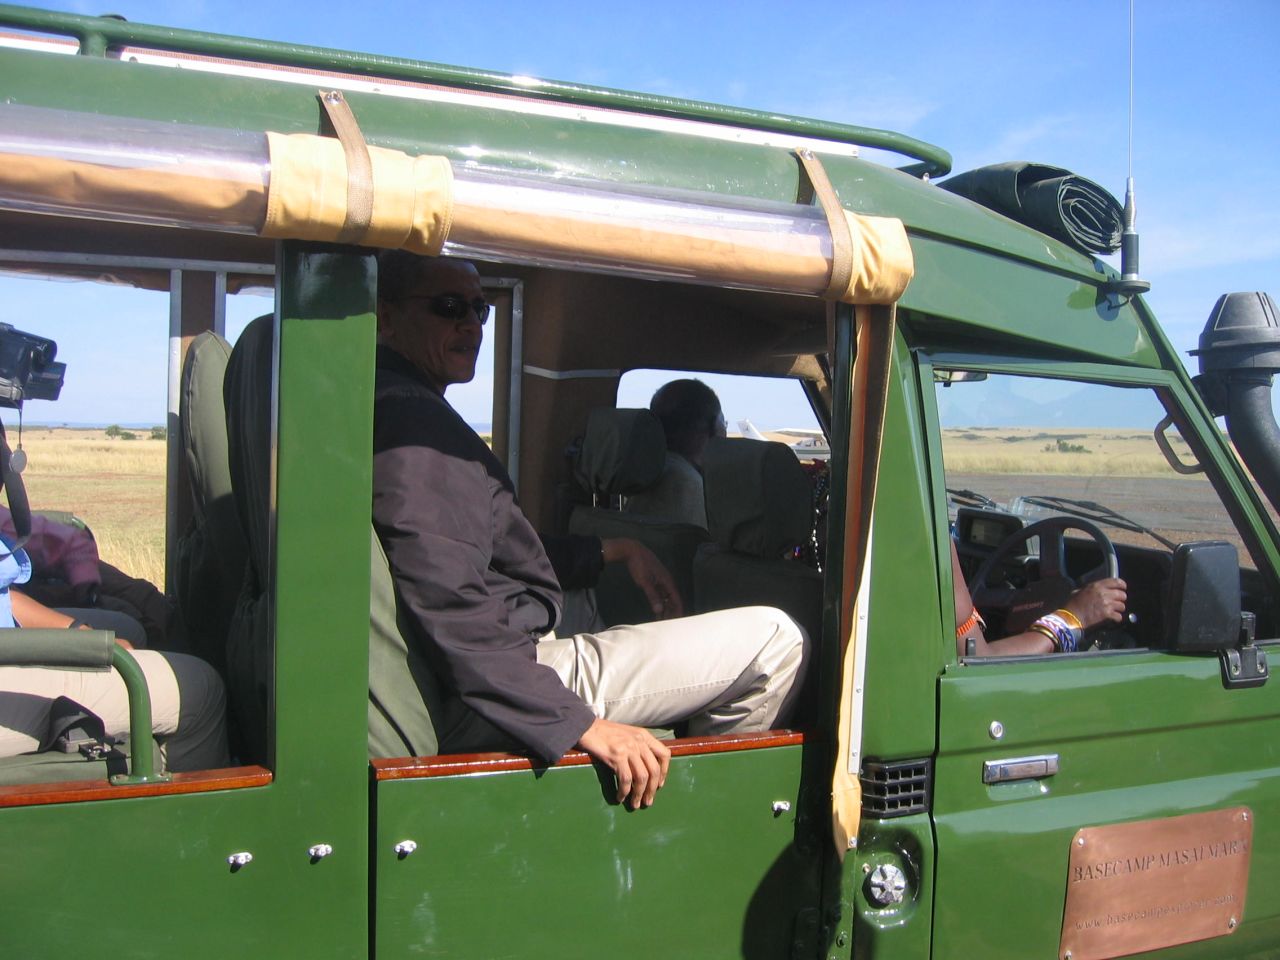 A safari in the Maasai Mara National Reserve was one of the side trips on Obama's 17-day, six-nation tour of Africa in 2006.